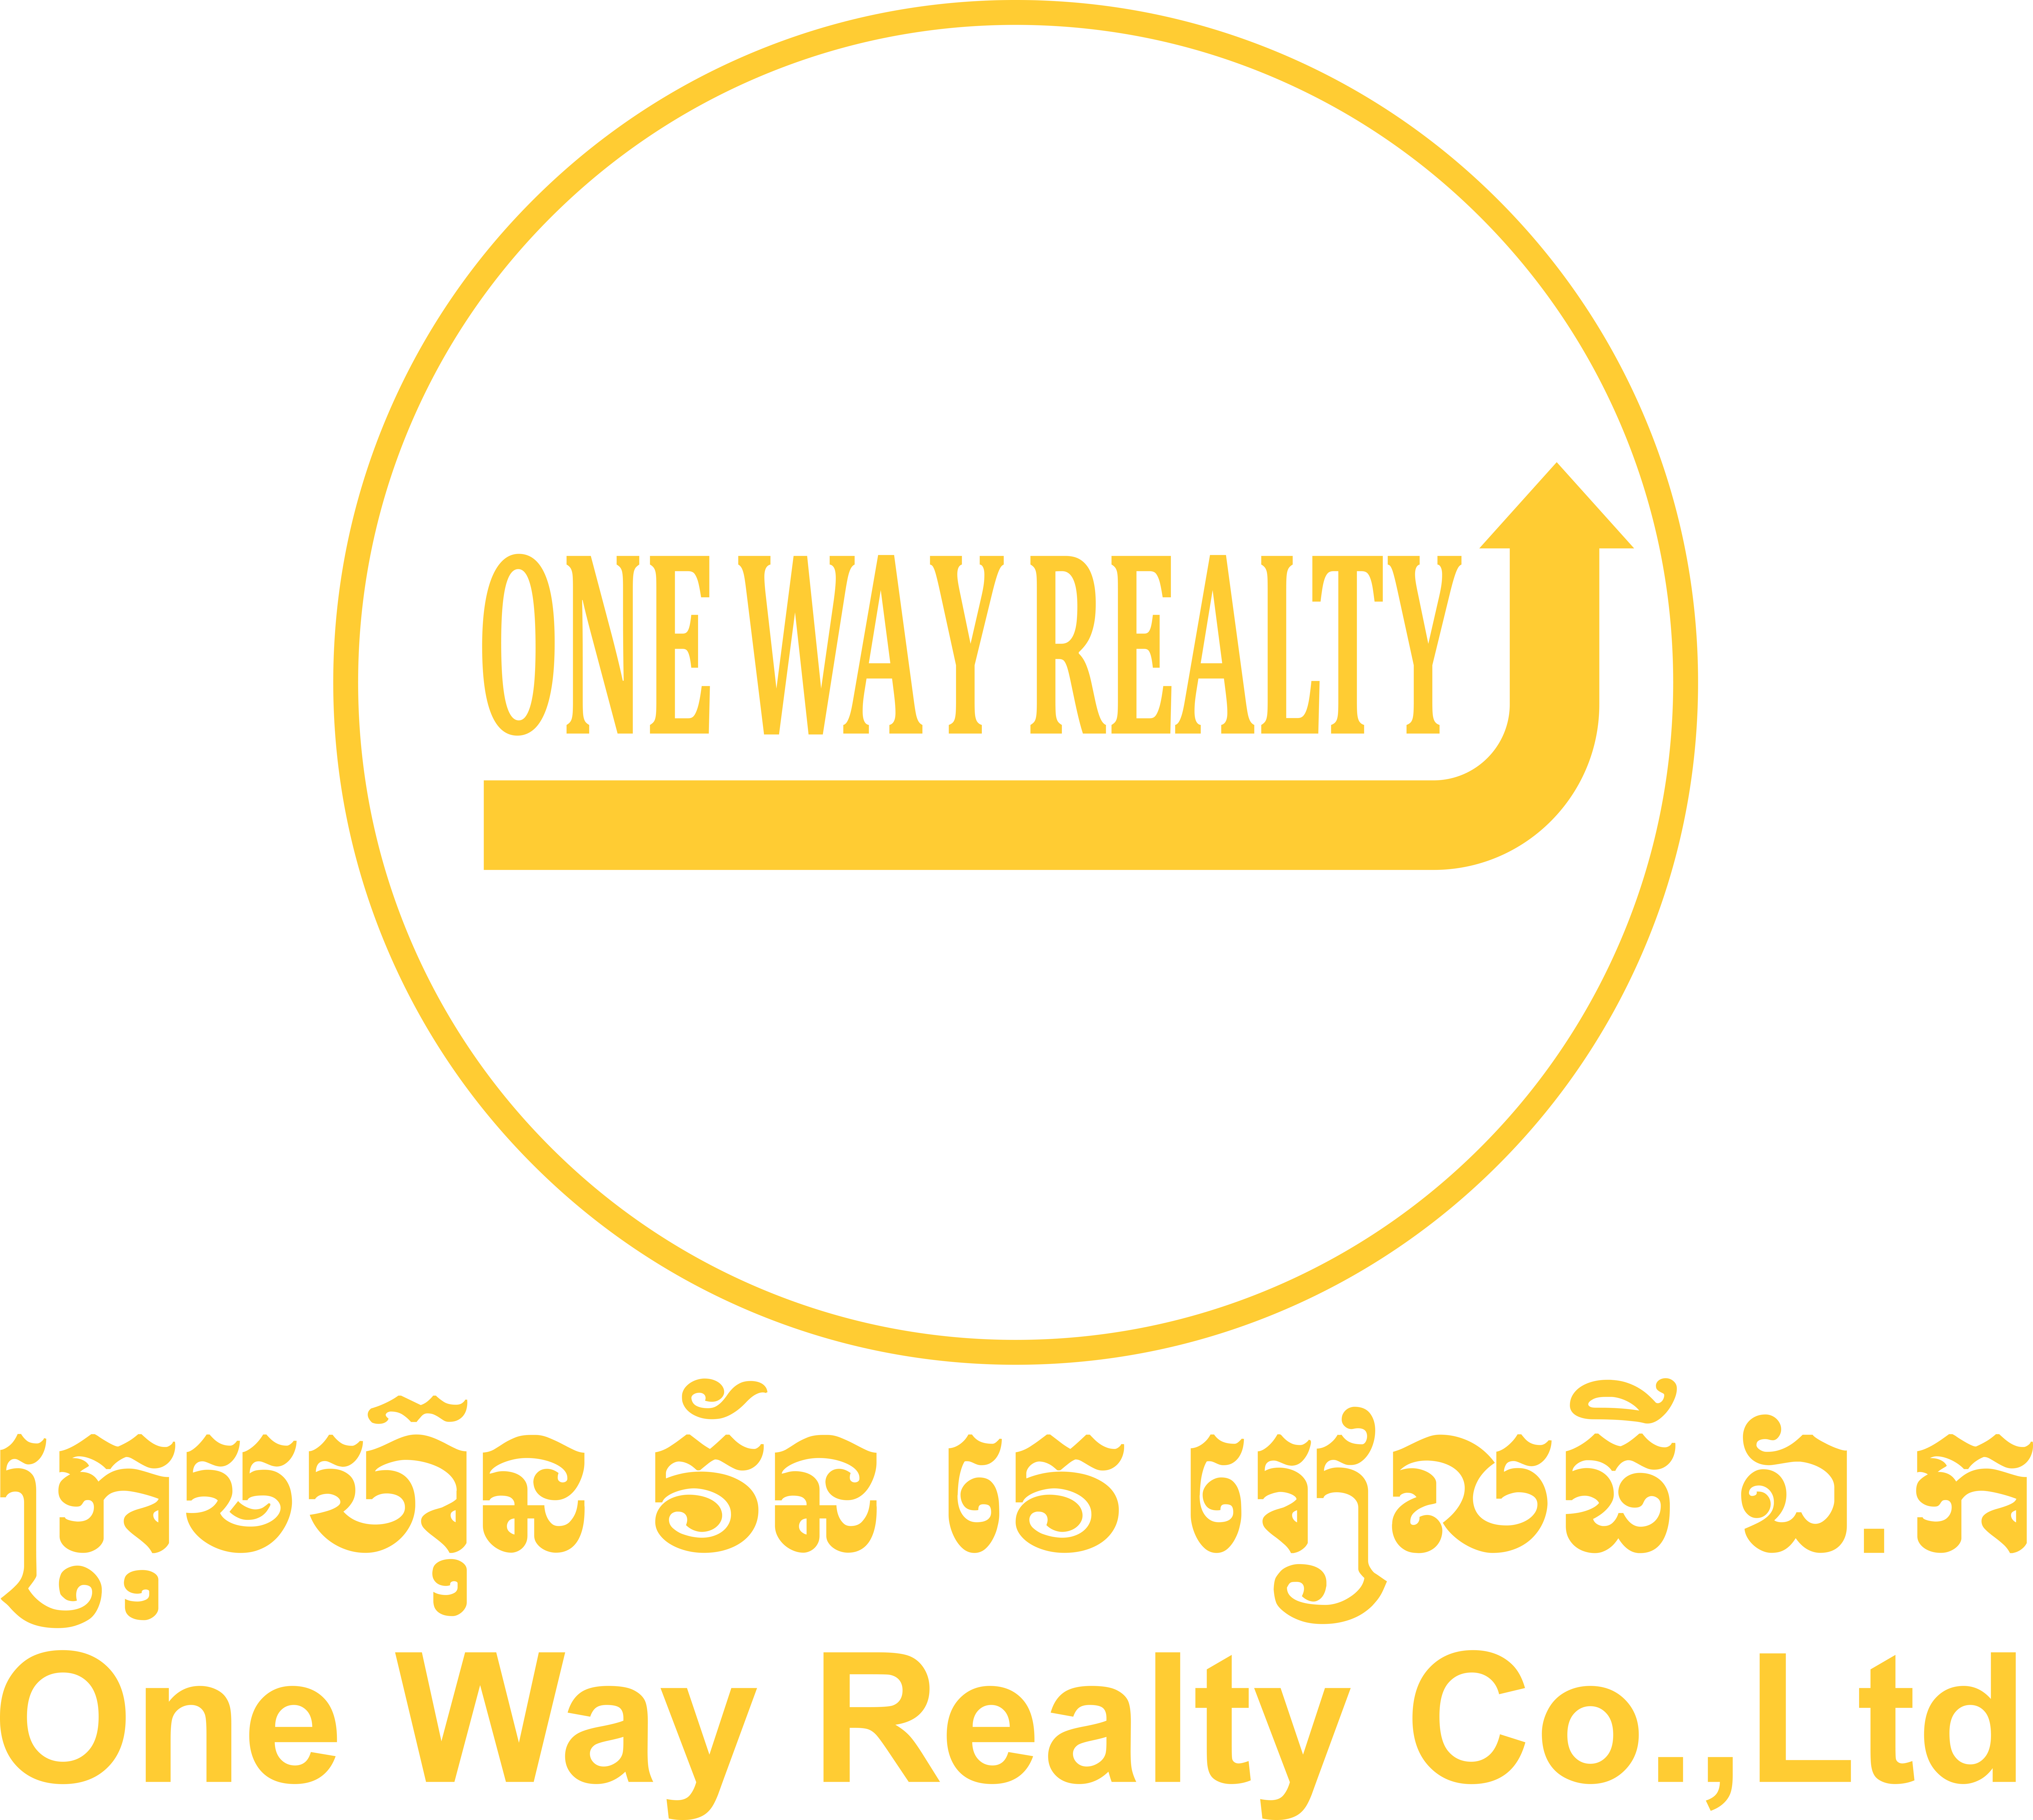 One Way Realty